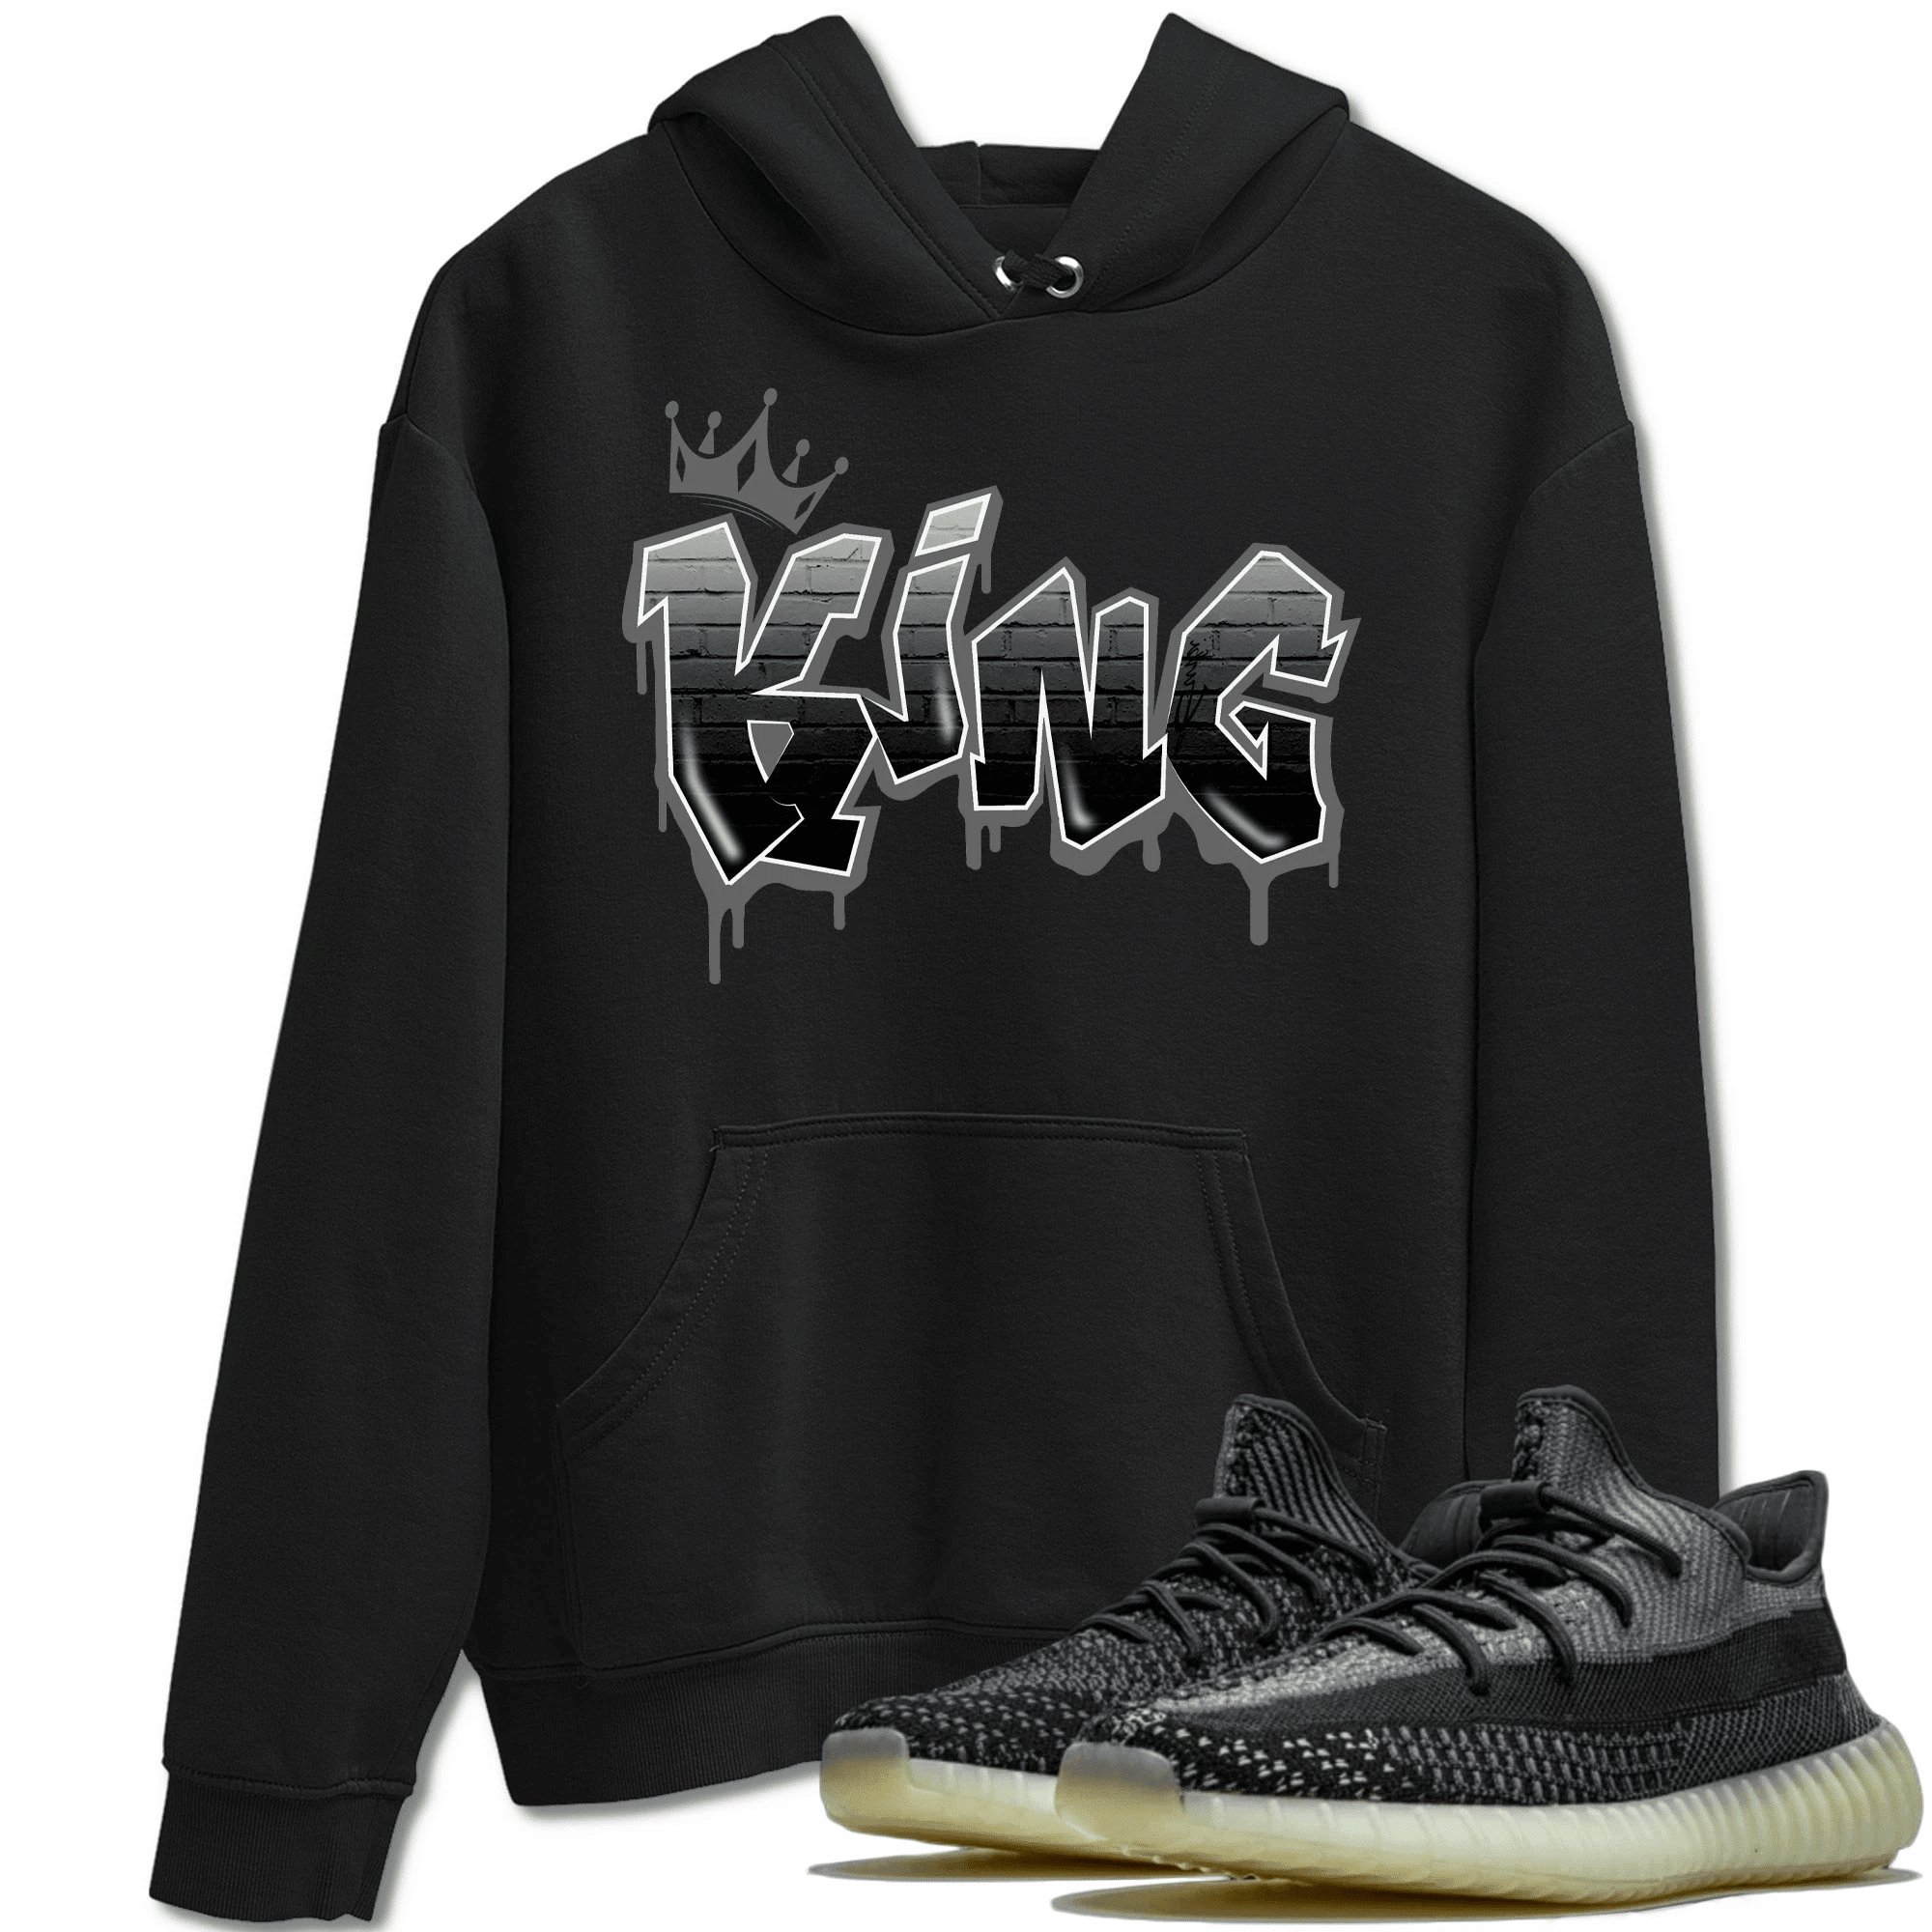 King Graffiti Hoodie - Yeezy 350 V2 Carbon Asriel Outfit